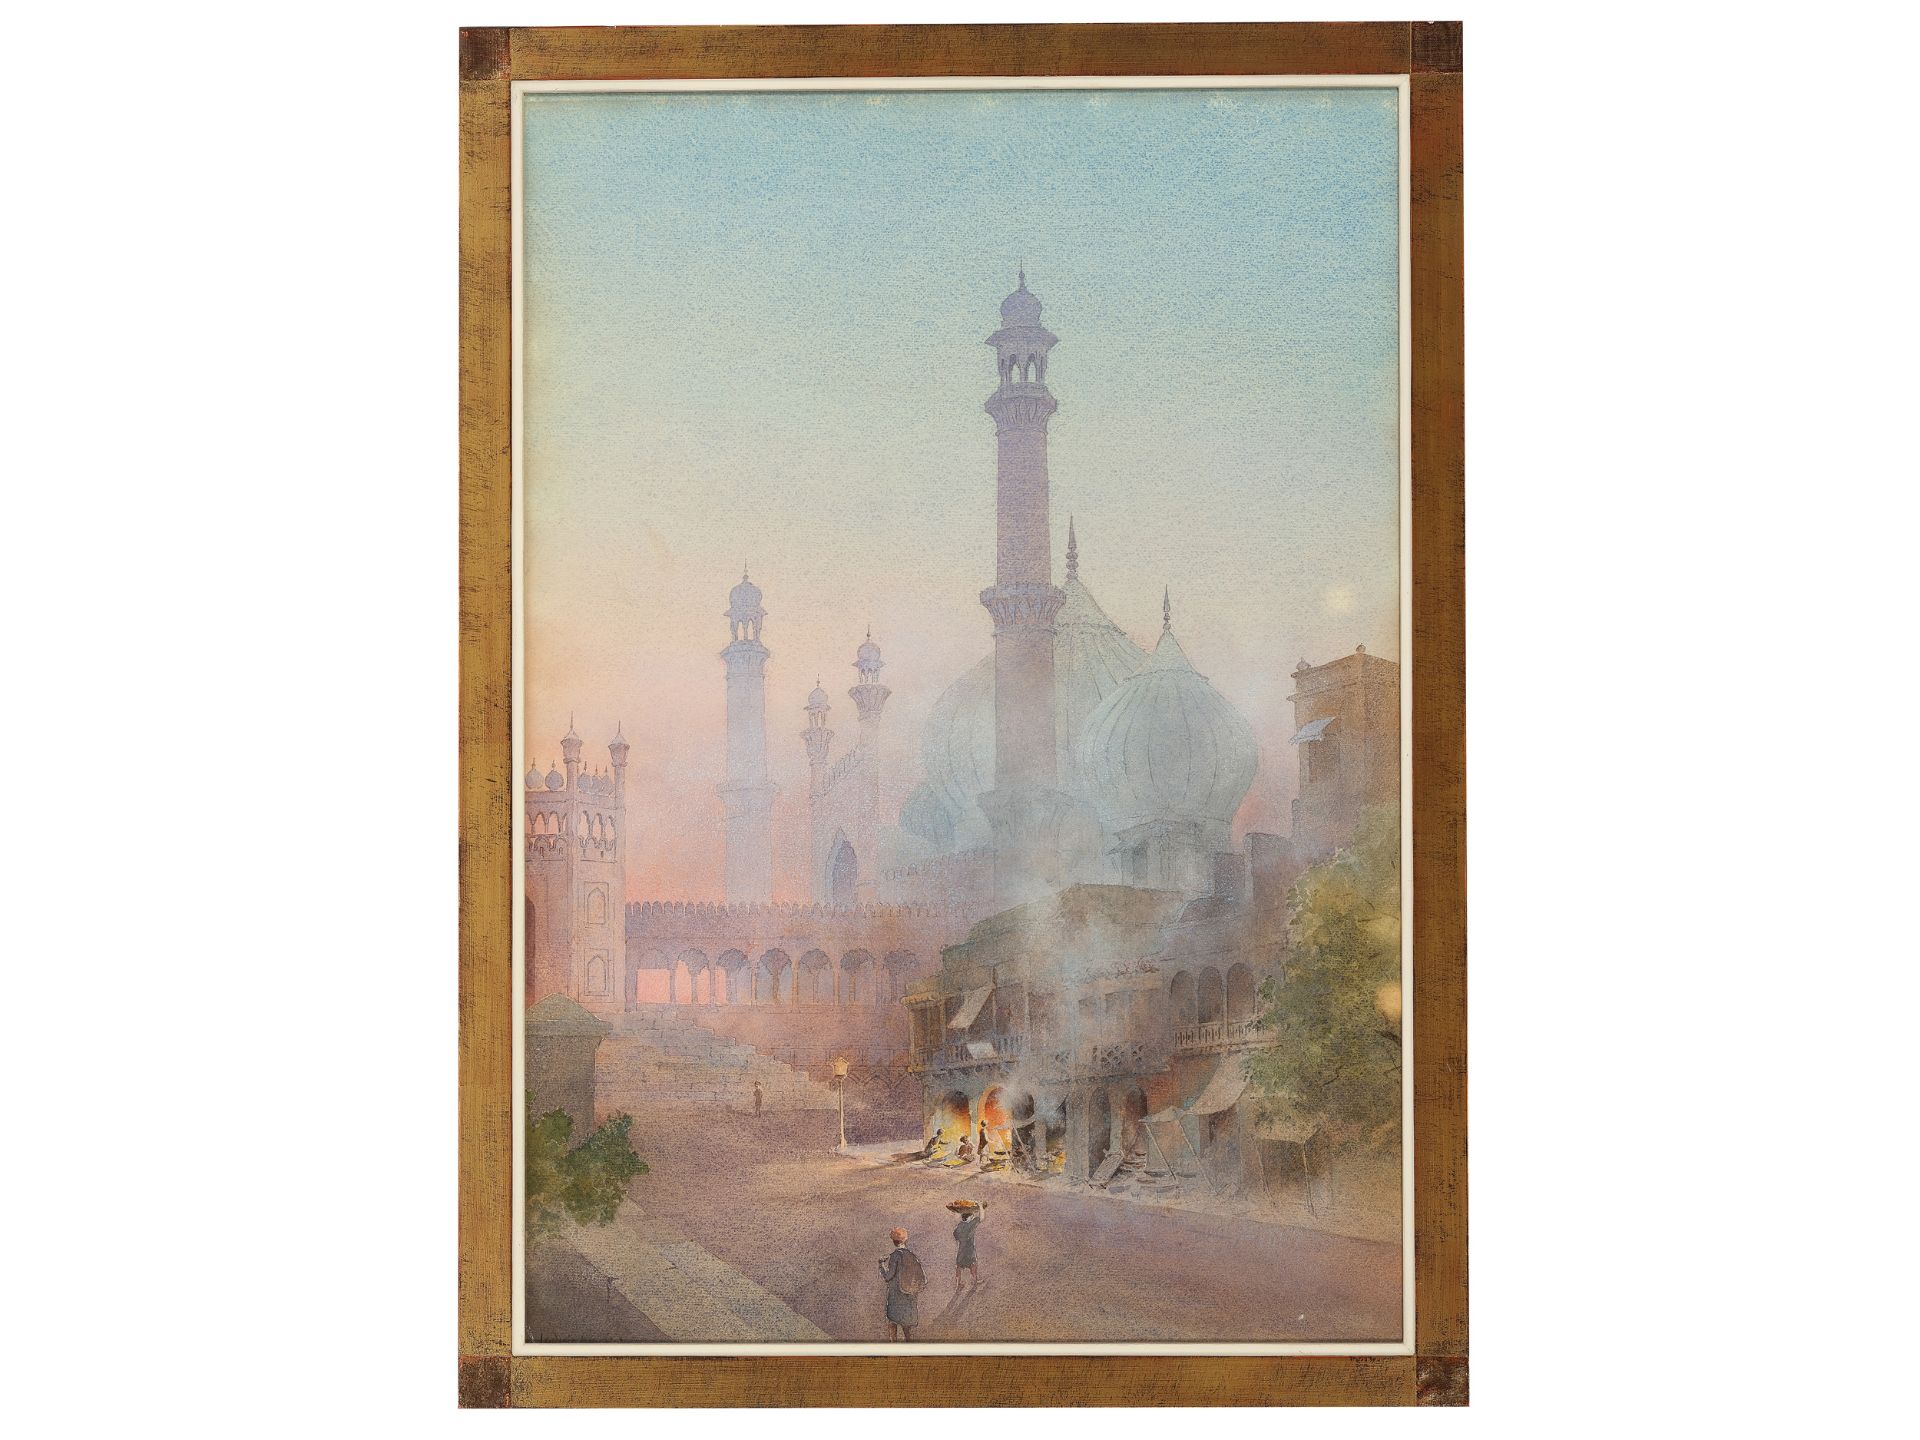 Sunrise in the Orient, Watercolour on paper - Image 2 of 6